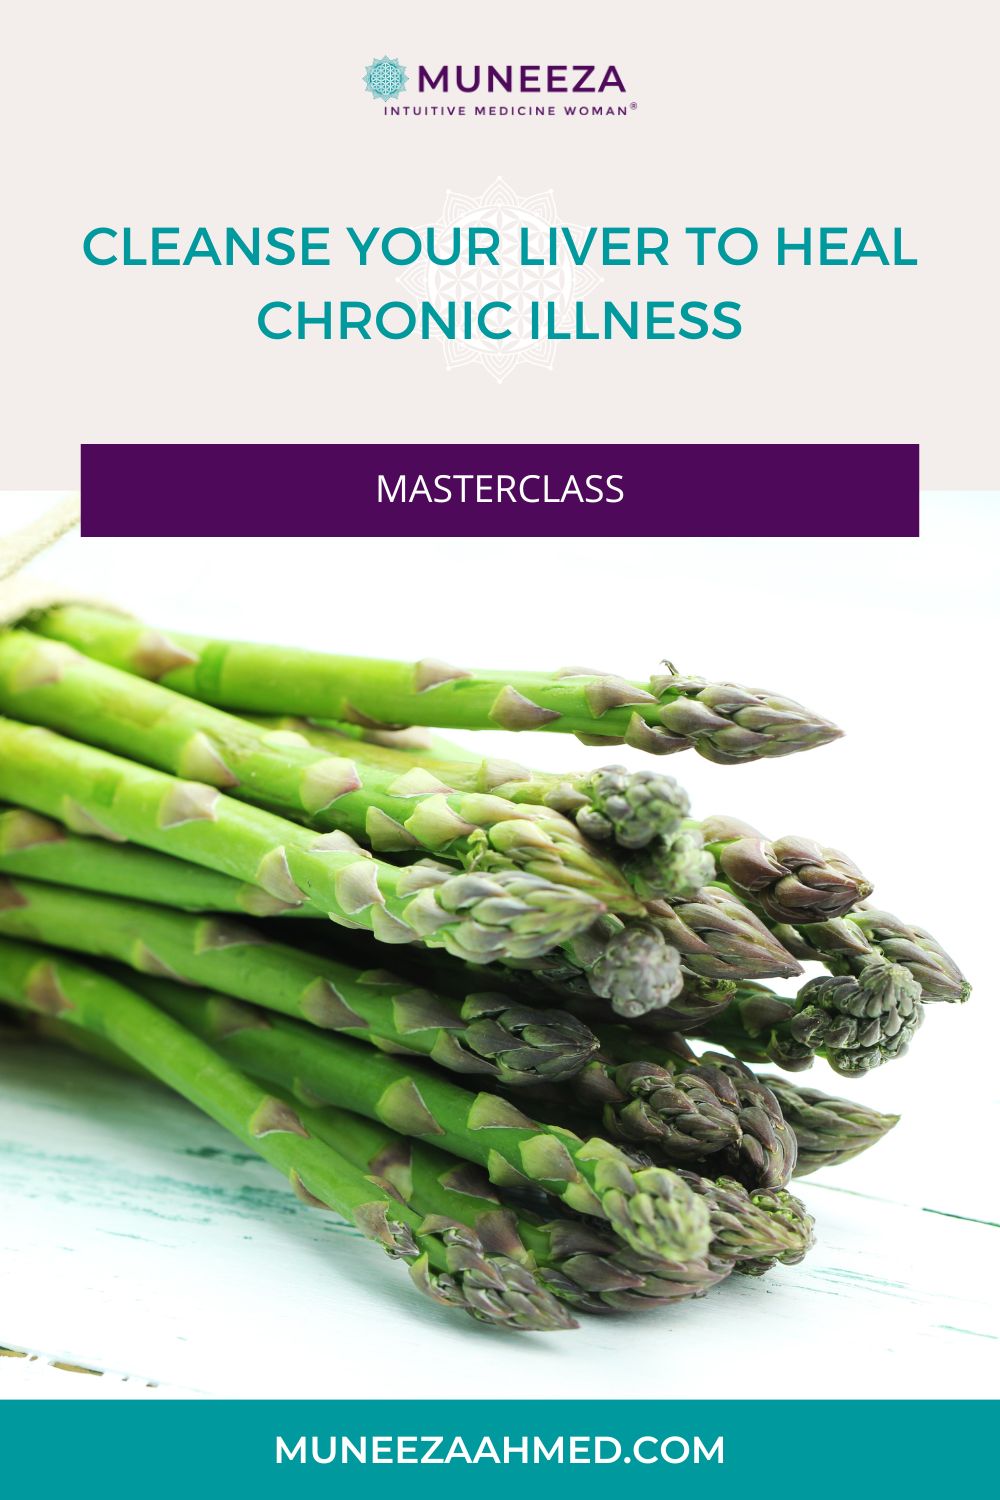 Cleanse Your Liver to Heal Chronic Illness